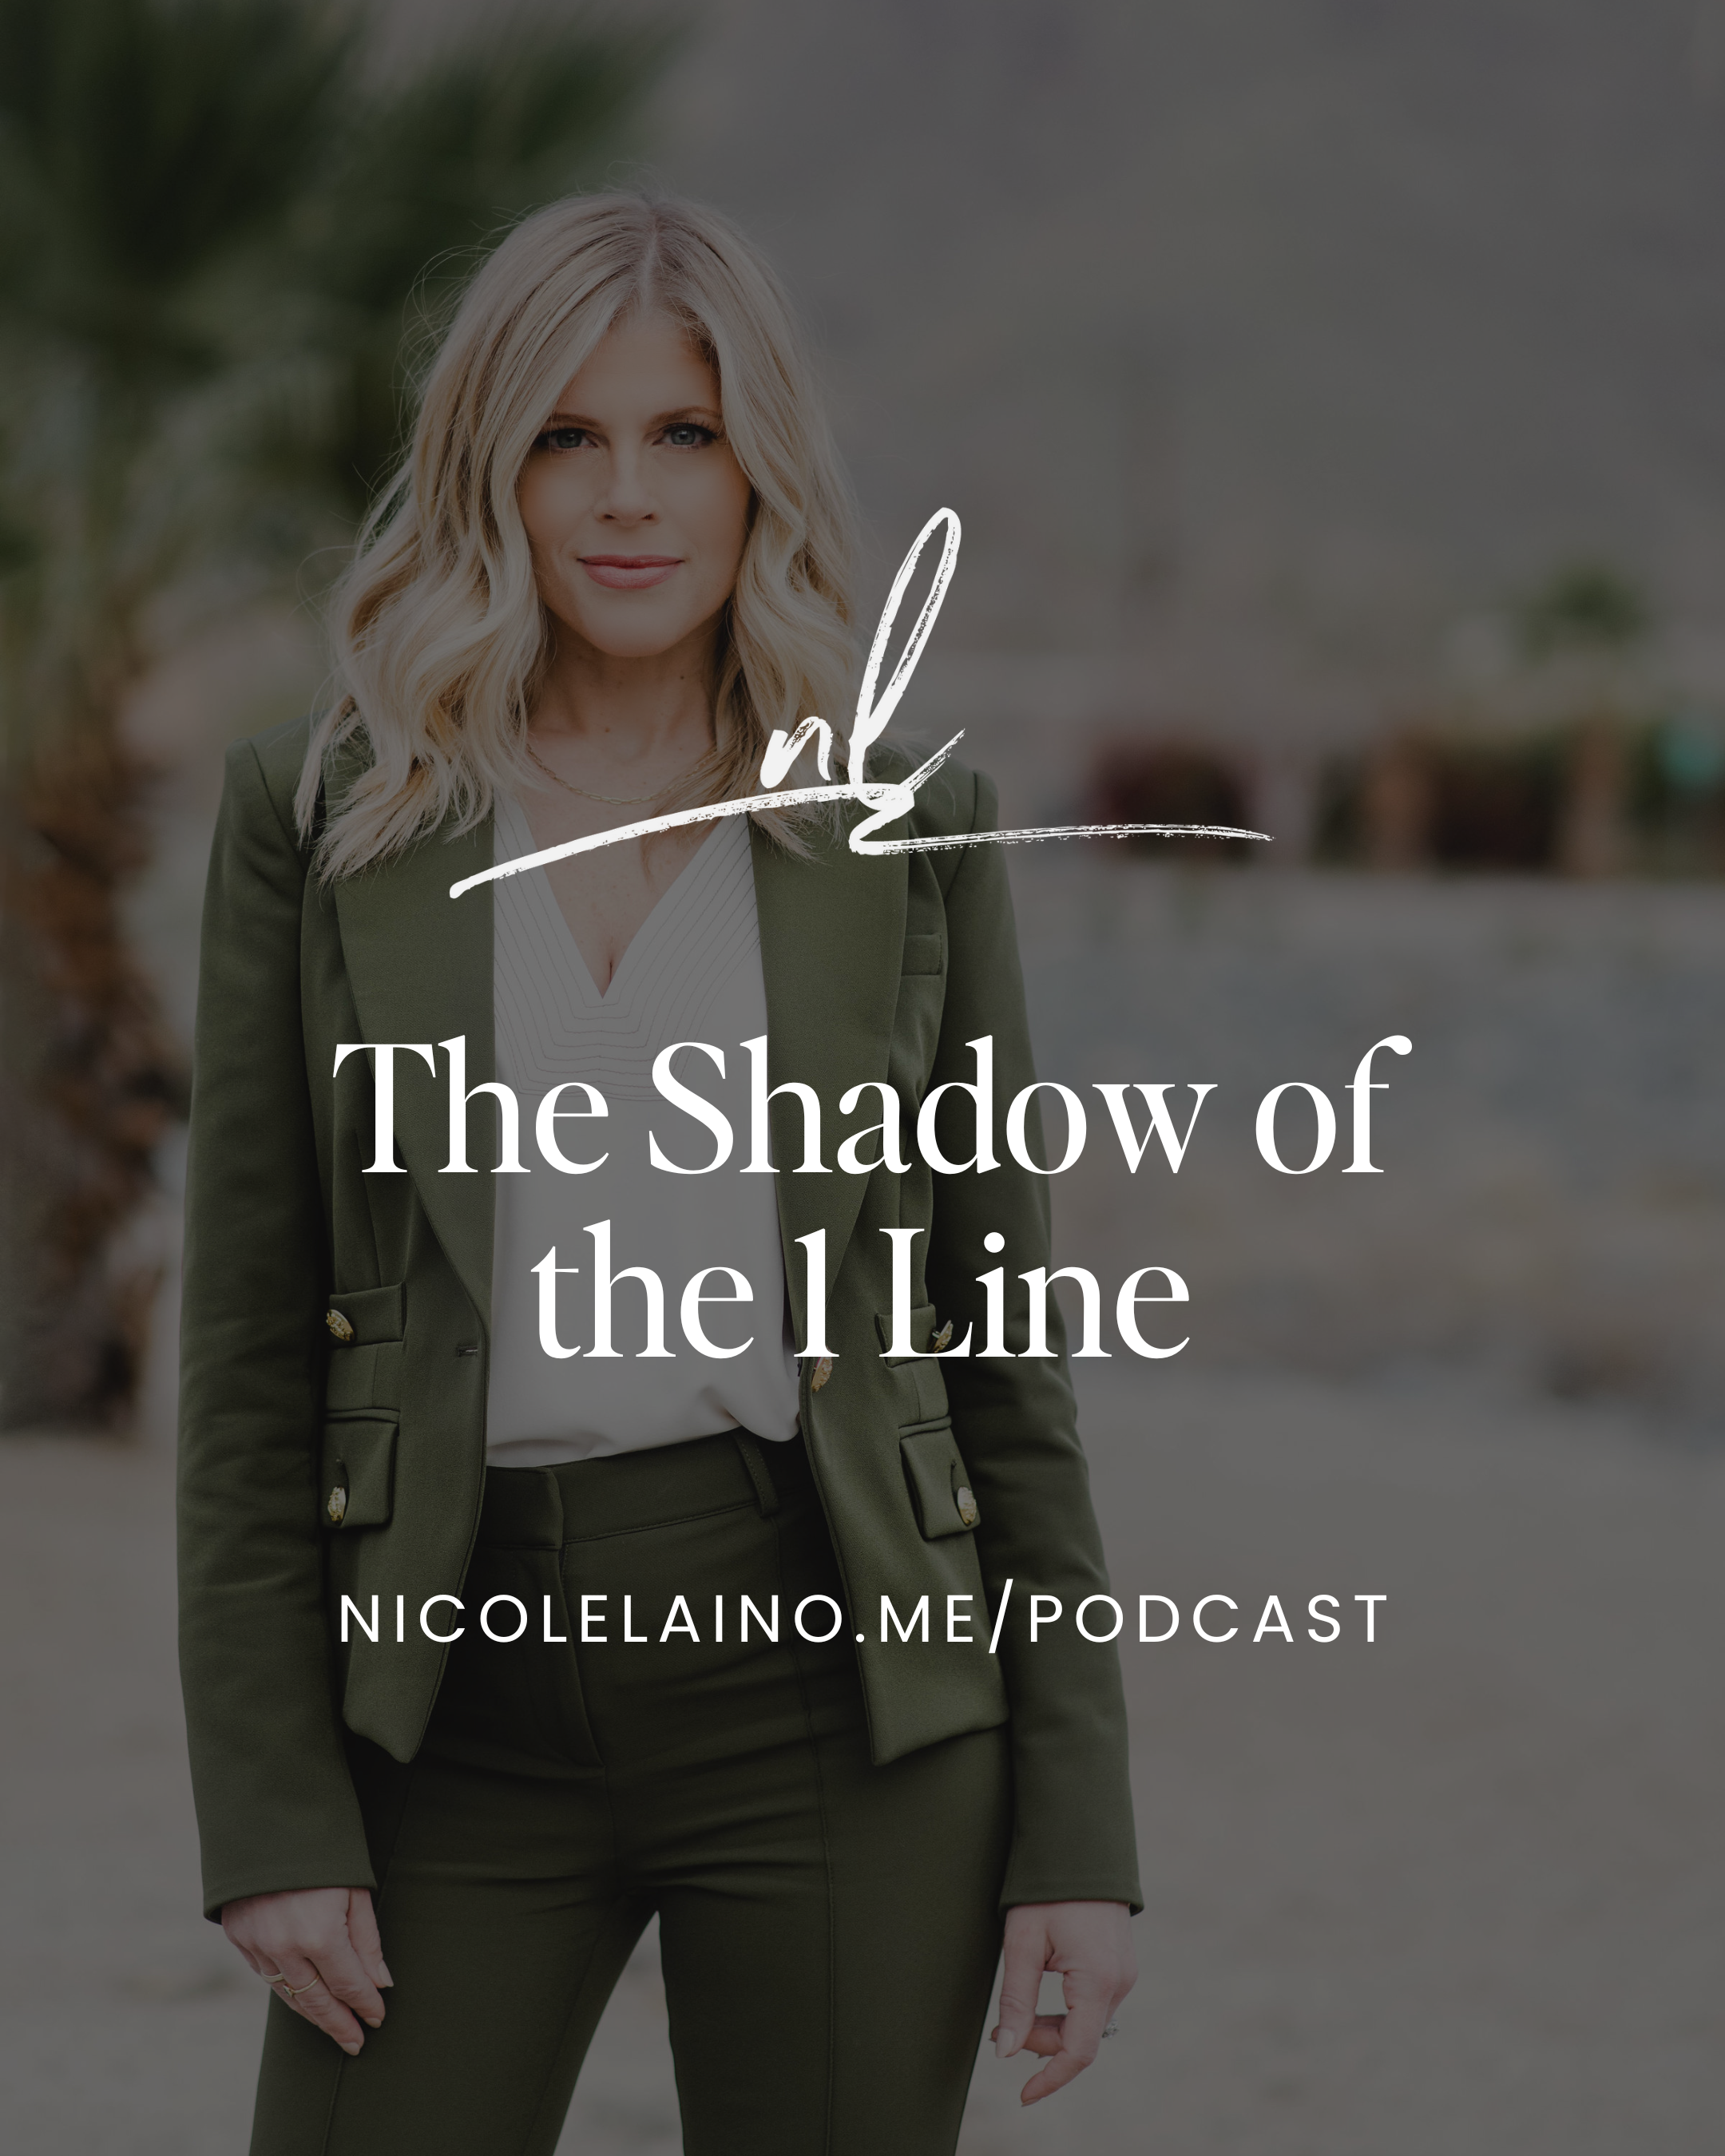 The Shadow of the 1 Line